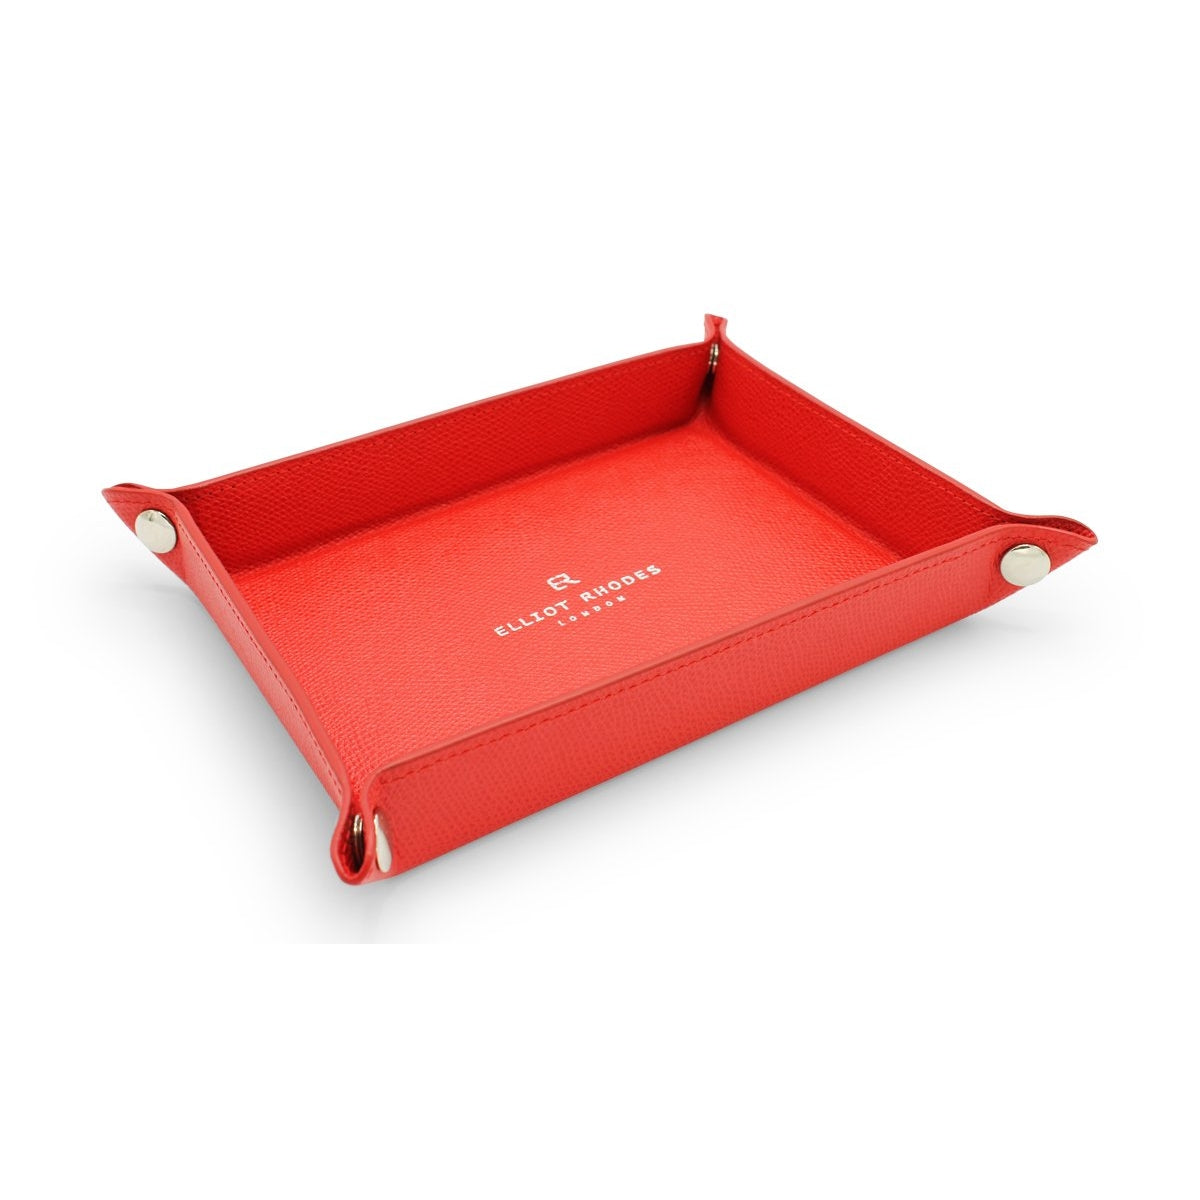 Elliot Rhodes Dauphin Leather Tray Red